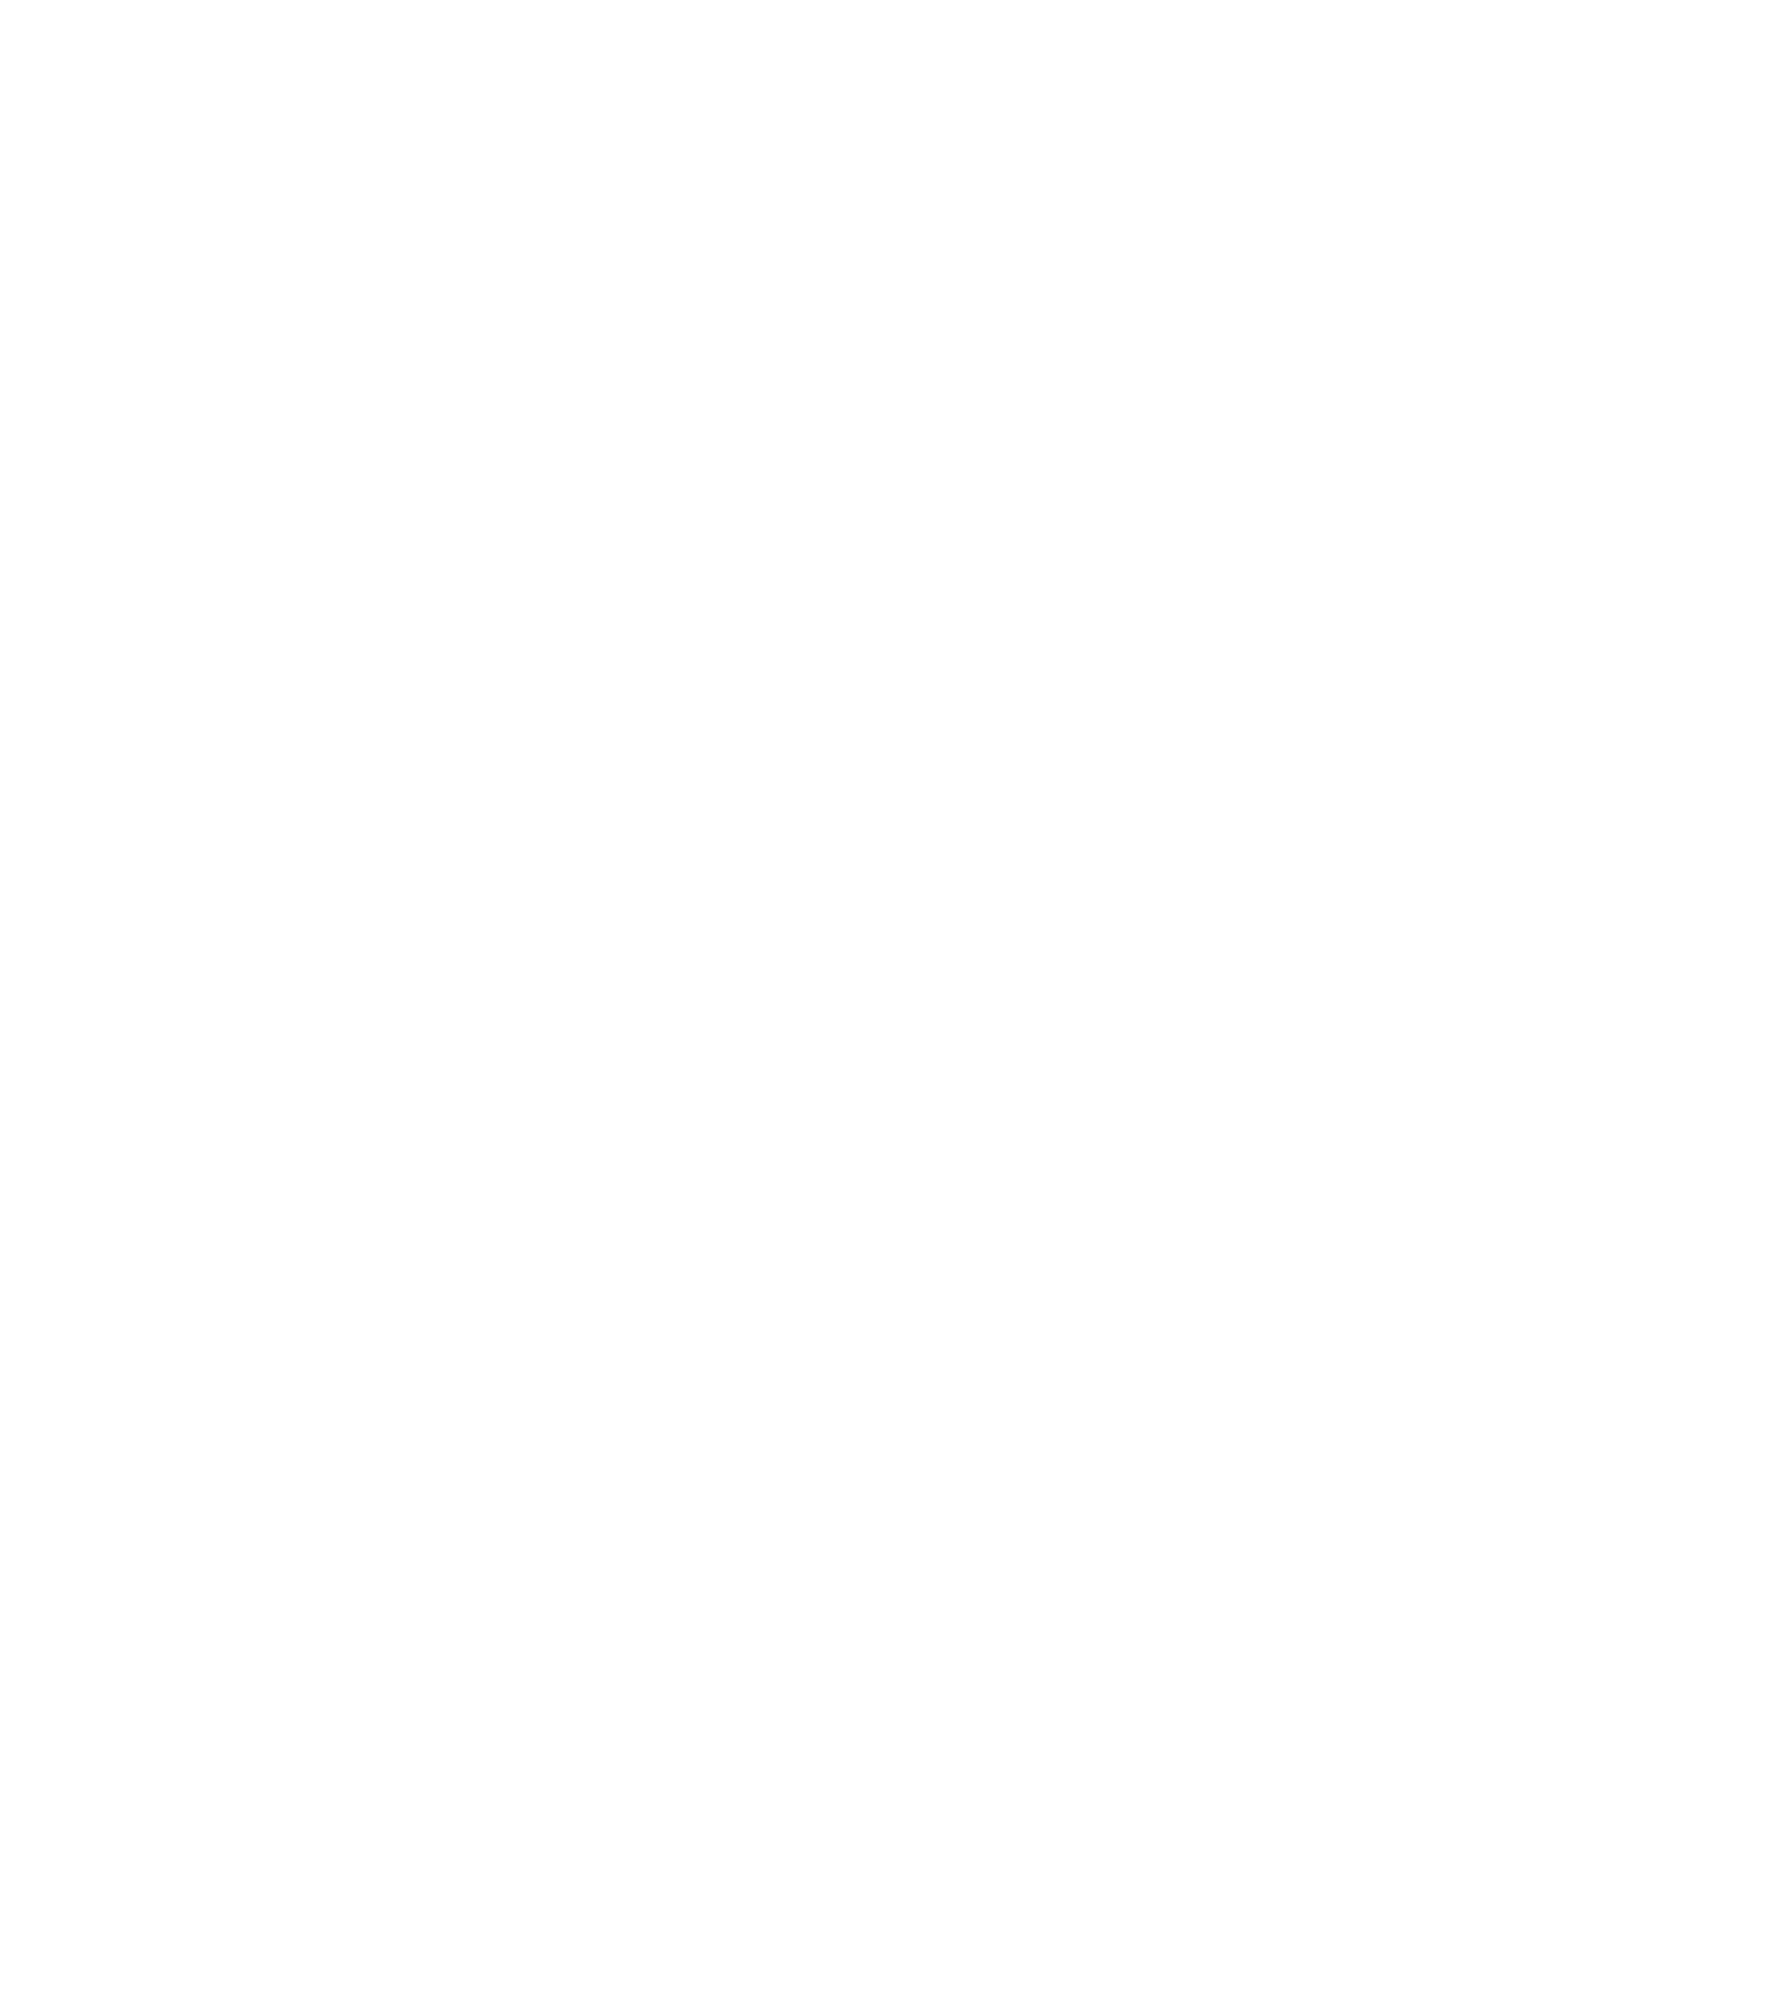 VNSG_logo_outline_payoff_wit-1